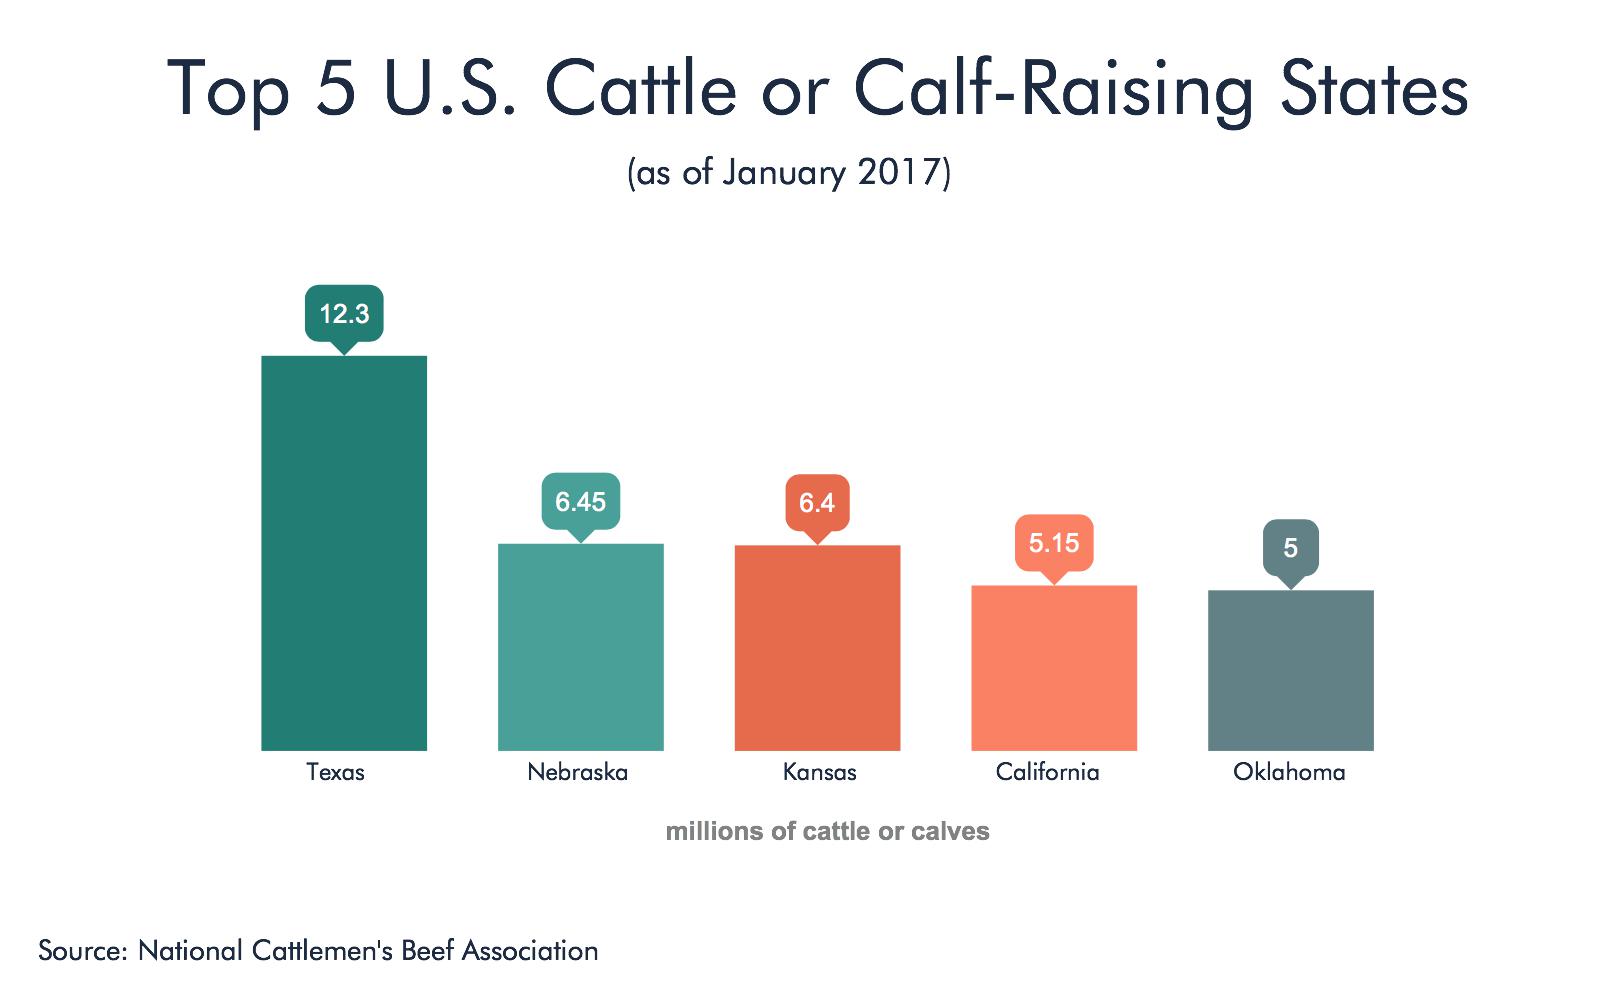 Top 5 US States for Cattle or Calf Raising